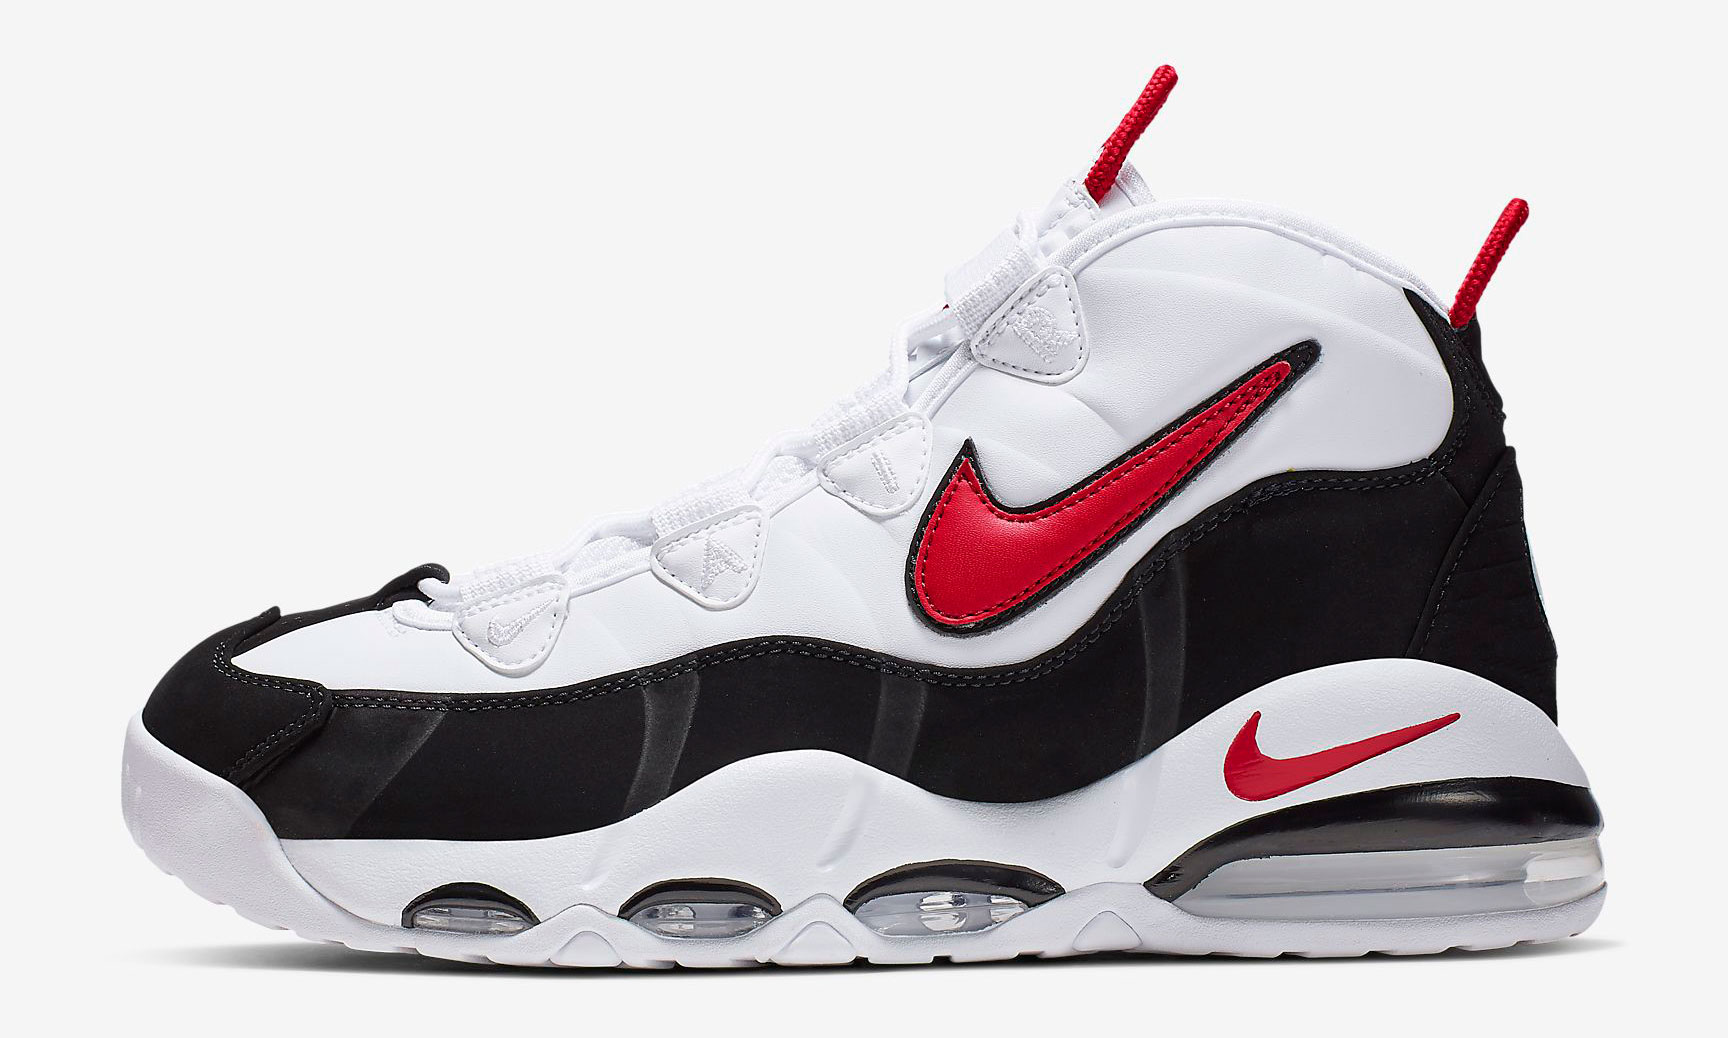 nike-air-max-uptempo-95-chicago-where-to-buy